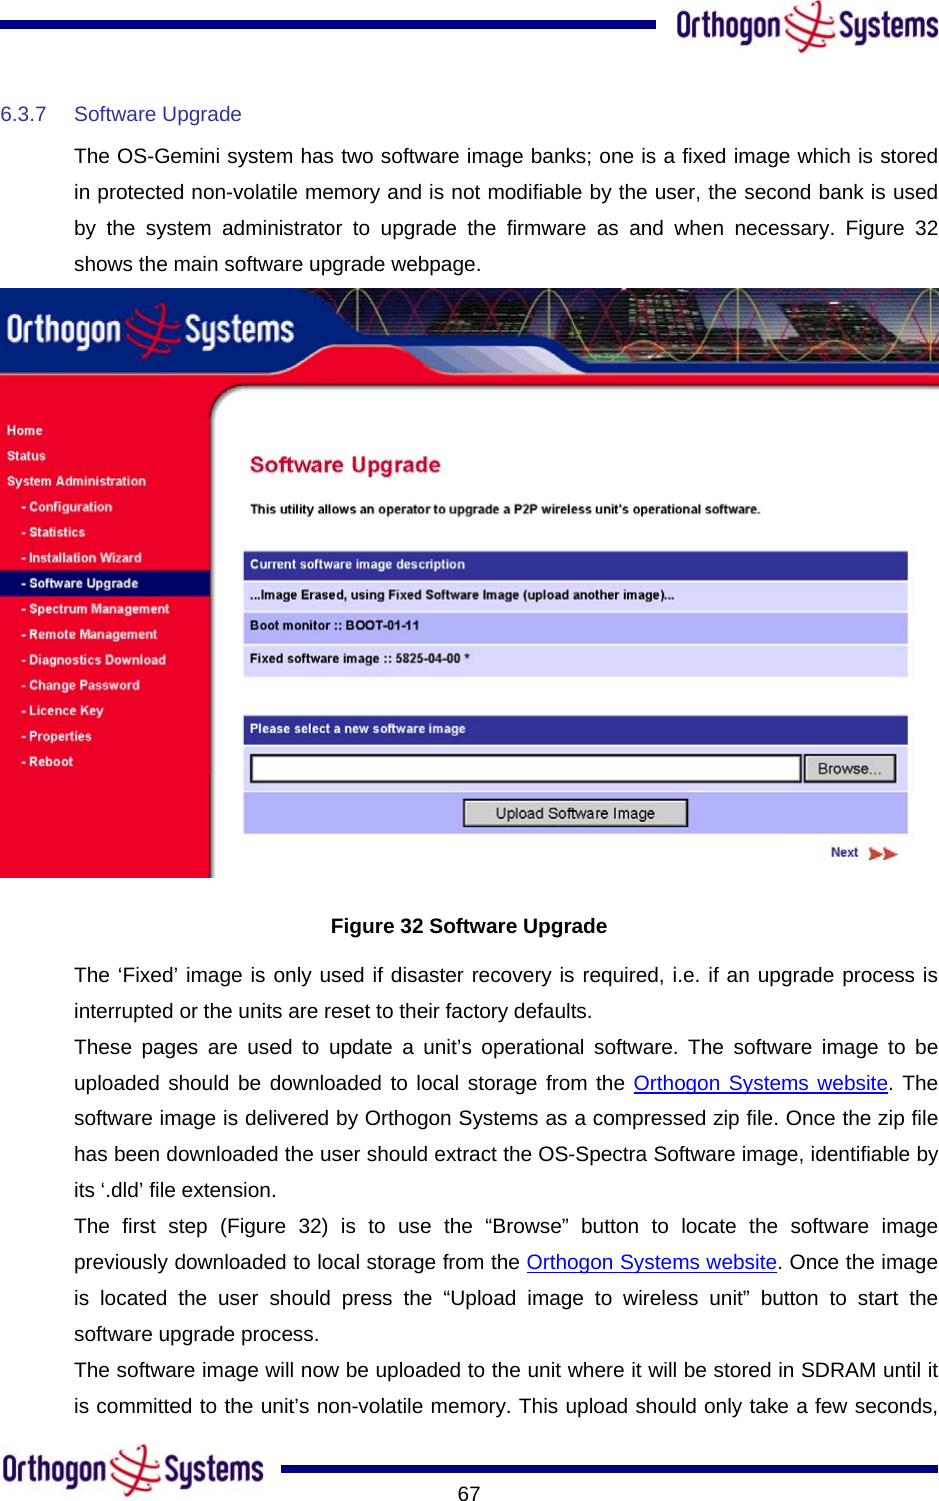       676.3.7 Software Upgrade The OS-Gemini system has two software image banks; one is a fixed image which is stored in protected non-volatile memory and is not modifiable by the user, the second bank is used by the system administrator to upgrade the firmware as and when necessary. Figure 32 shows the main software upgrade webpage.  Figure 32 Software Upgrade The ‘Fixed’ image is only used if disaster recovery is required, i.e. if an upgrade process is interrupted or the units are reset to their factory defaults. These pages are used to update a unit’s operational software. The software image to be uploaded should be downloaded to local storage from the Orthogon Systems website. The software image is delivered by Orthogon Systems as a compressed zip file. Once the zip file has been downloaded the user should extract the OS-Spectra Software image, identifiable by its ‘.dld’ file extension. The first step (Figure 32) is to use the “Browse” button to locate the software image previously downloaded to local storage from the Orthogon Systems website. Once the image is located the user should press the “Upload image to wireless unit” button to start the software upgrade process.  The software image will now be uploaded to the unit where it will be stored in SDRAM until it is committed to the unit’s non-volatile memory. This upload should only take a few seconds, 